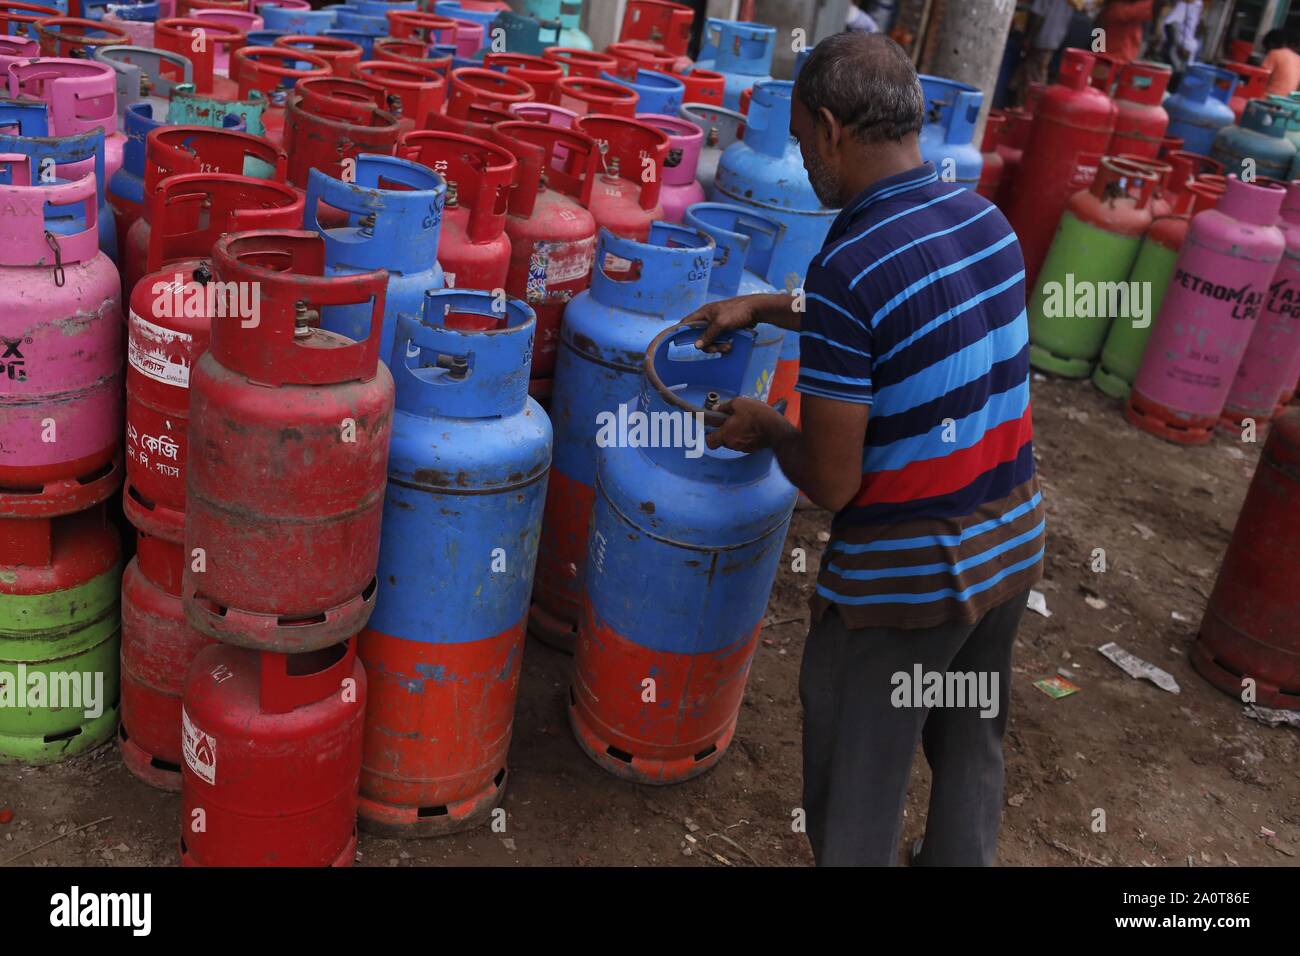 Lpg Gas Cylinder Stock Photos Lpg Gas Cylinder Stock Images Alamy